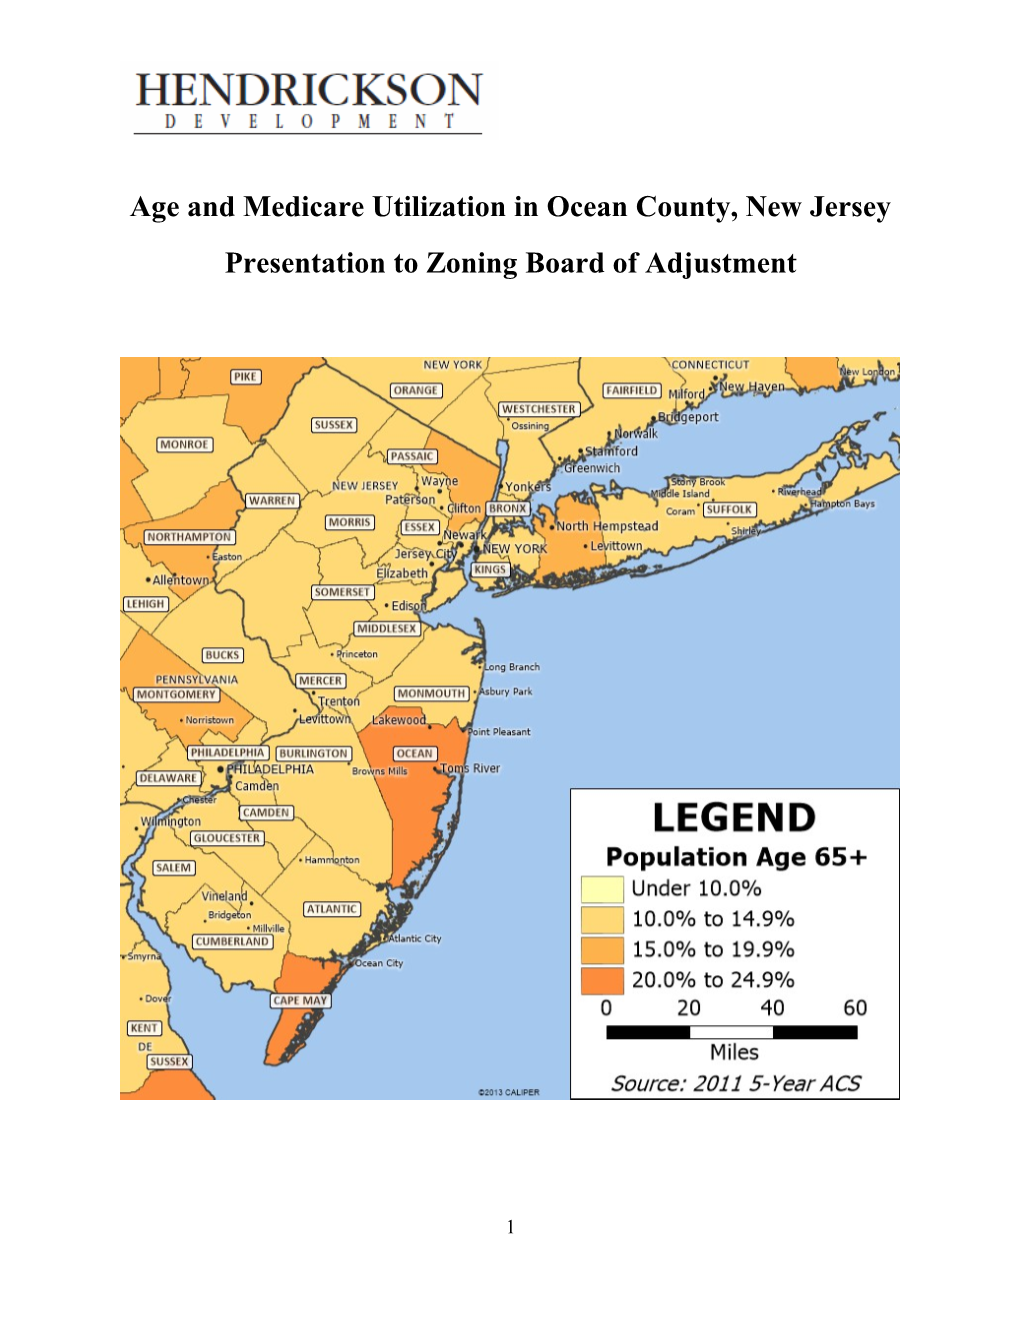 Age and Medicare Utilization in Ocean County, New Jersey